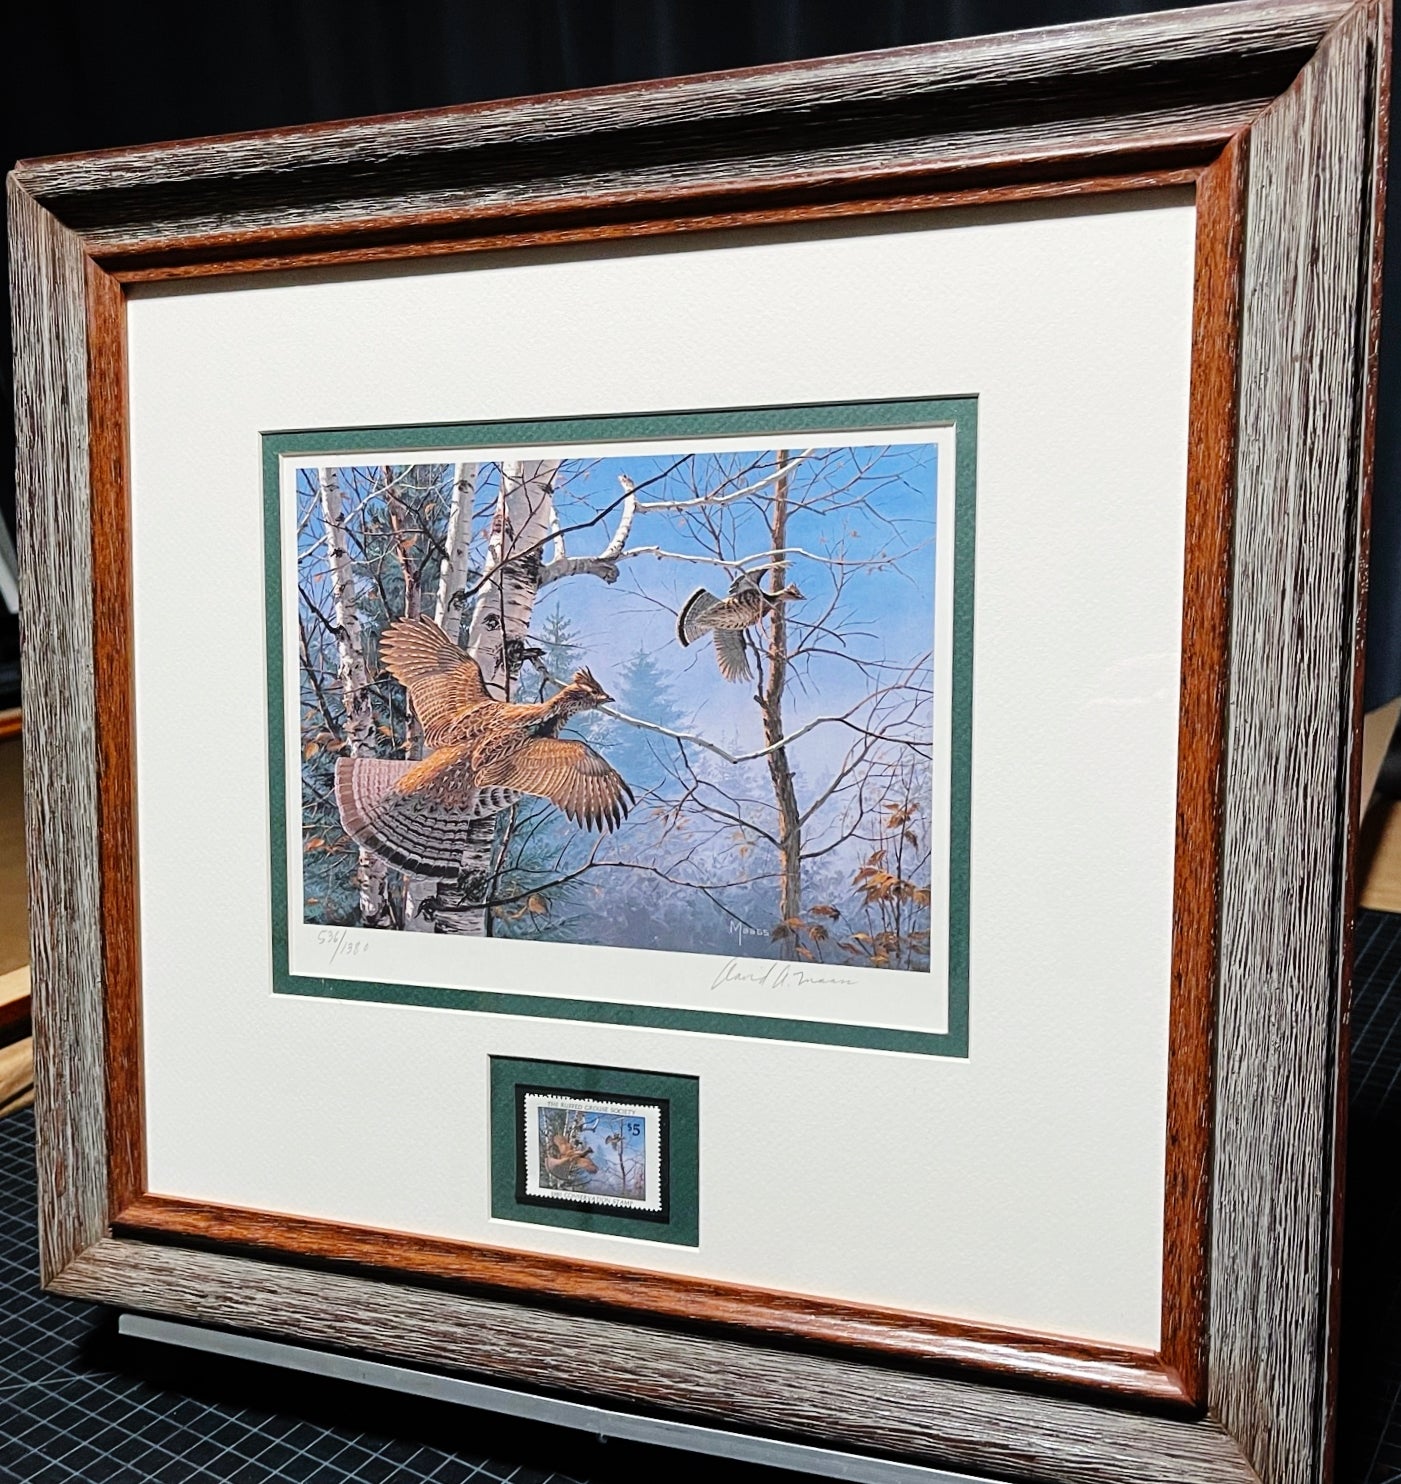 David Maass - 1980 The Ruffed Grouse Society Conservation Stamp Print With Stamp - Brand New Custom Sporting Frame